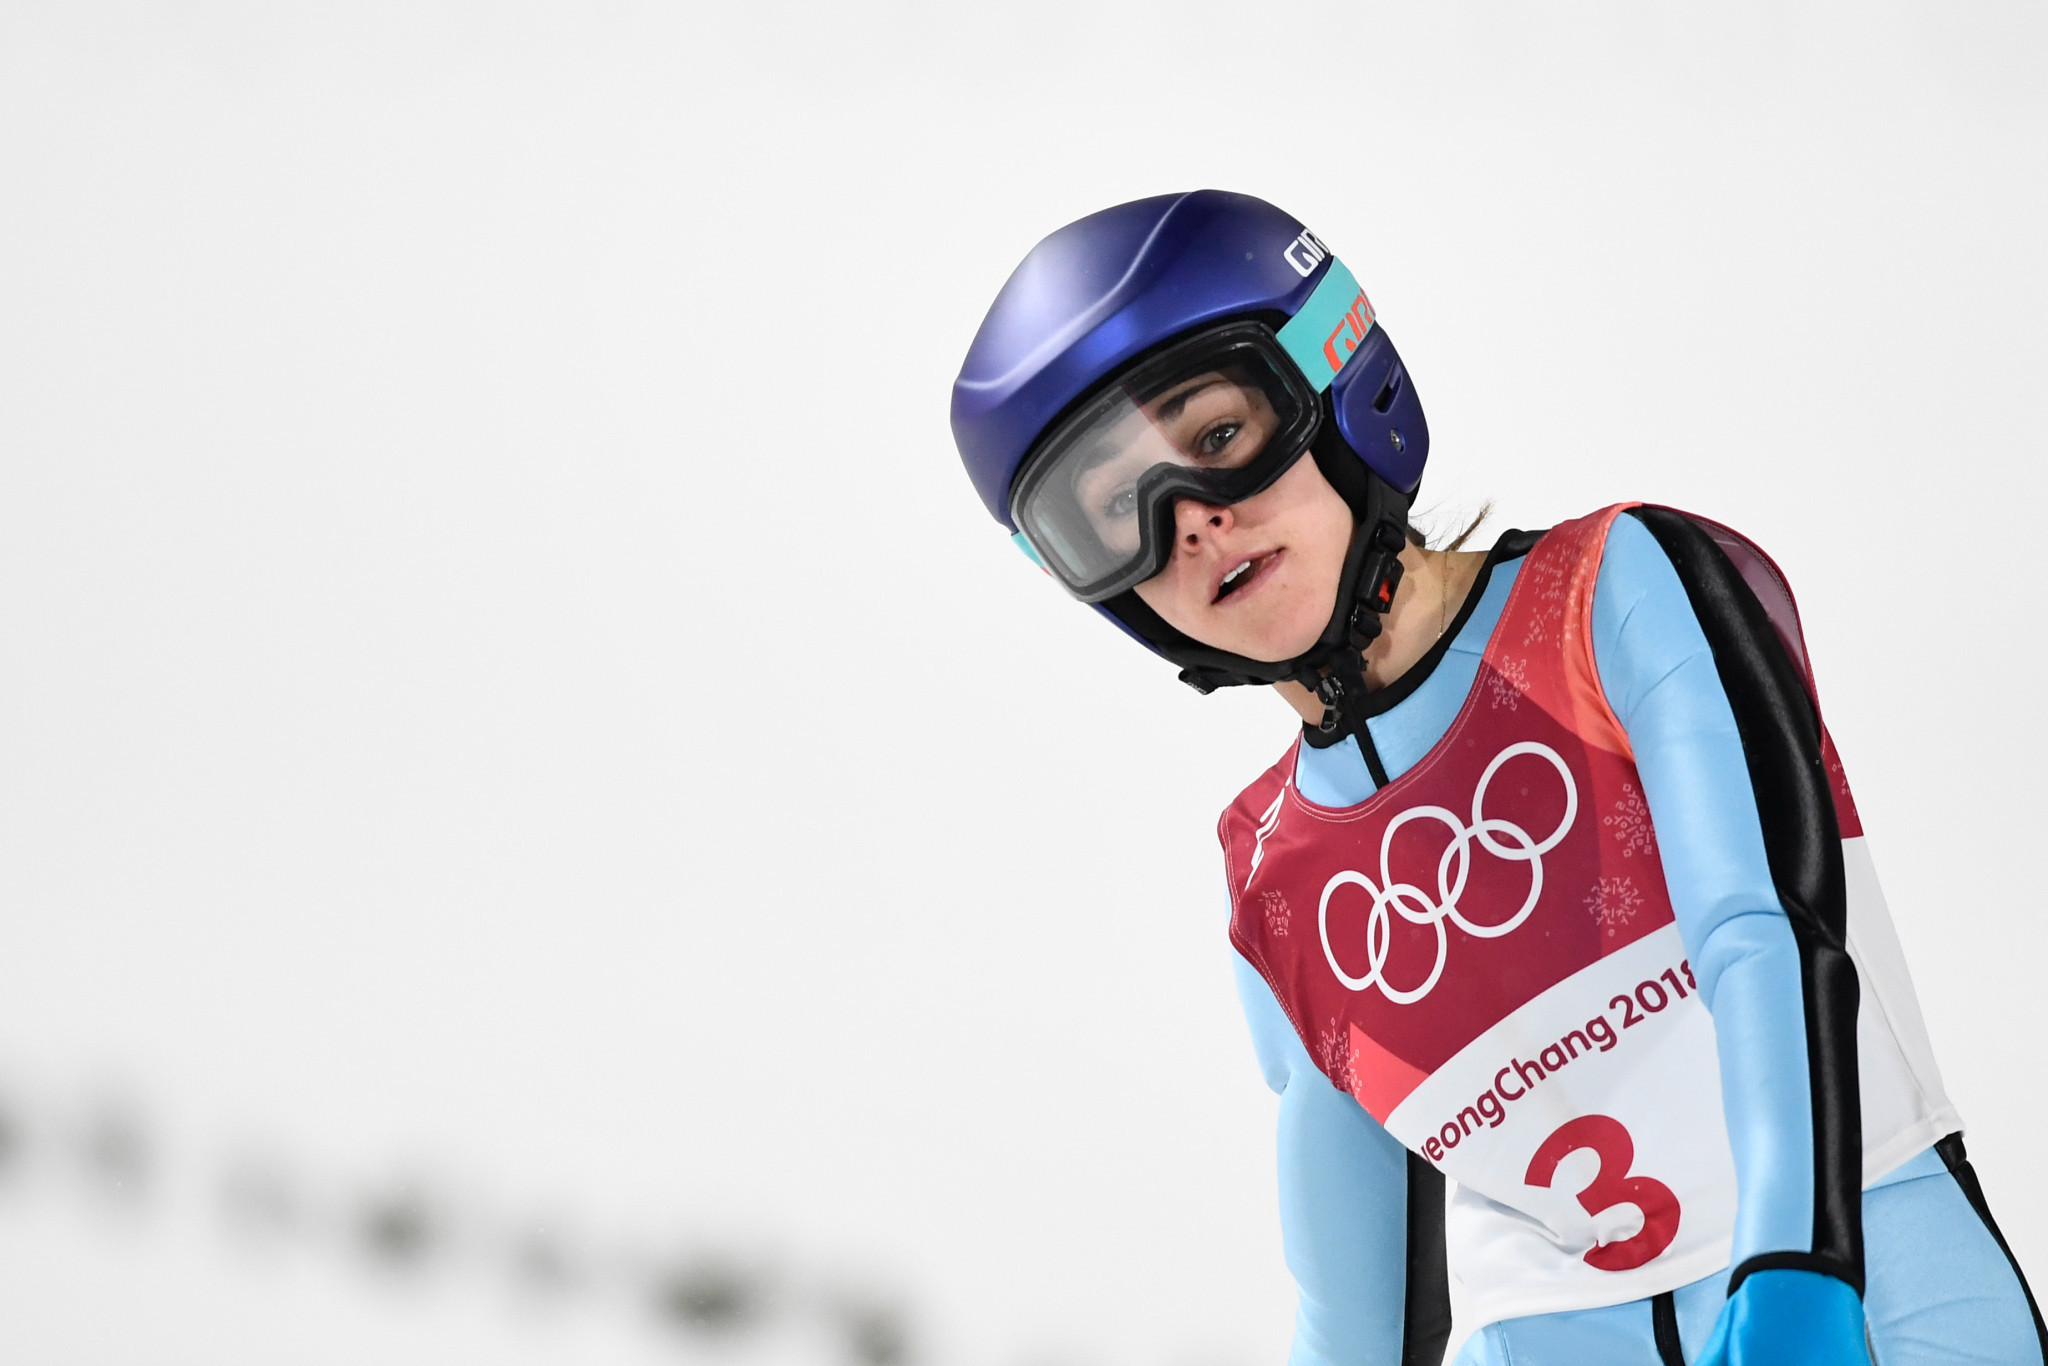 Hendrickson took a break from competitive ski jumping after the 2018 Winter Olympic Games in Pyeongchang ©Getty Images